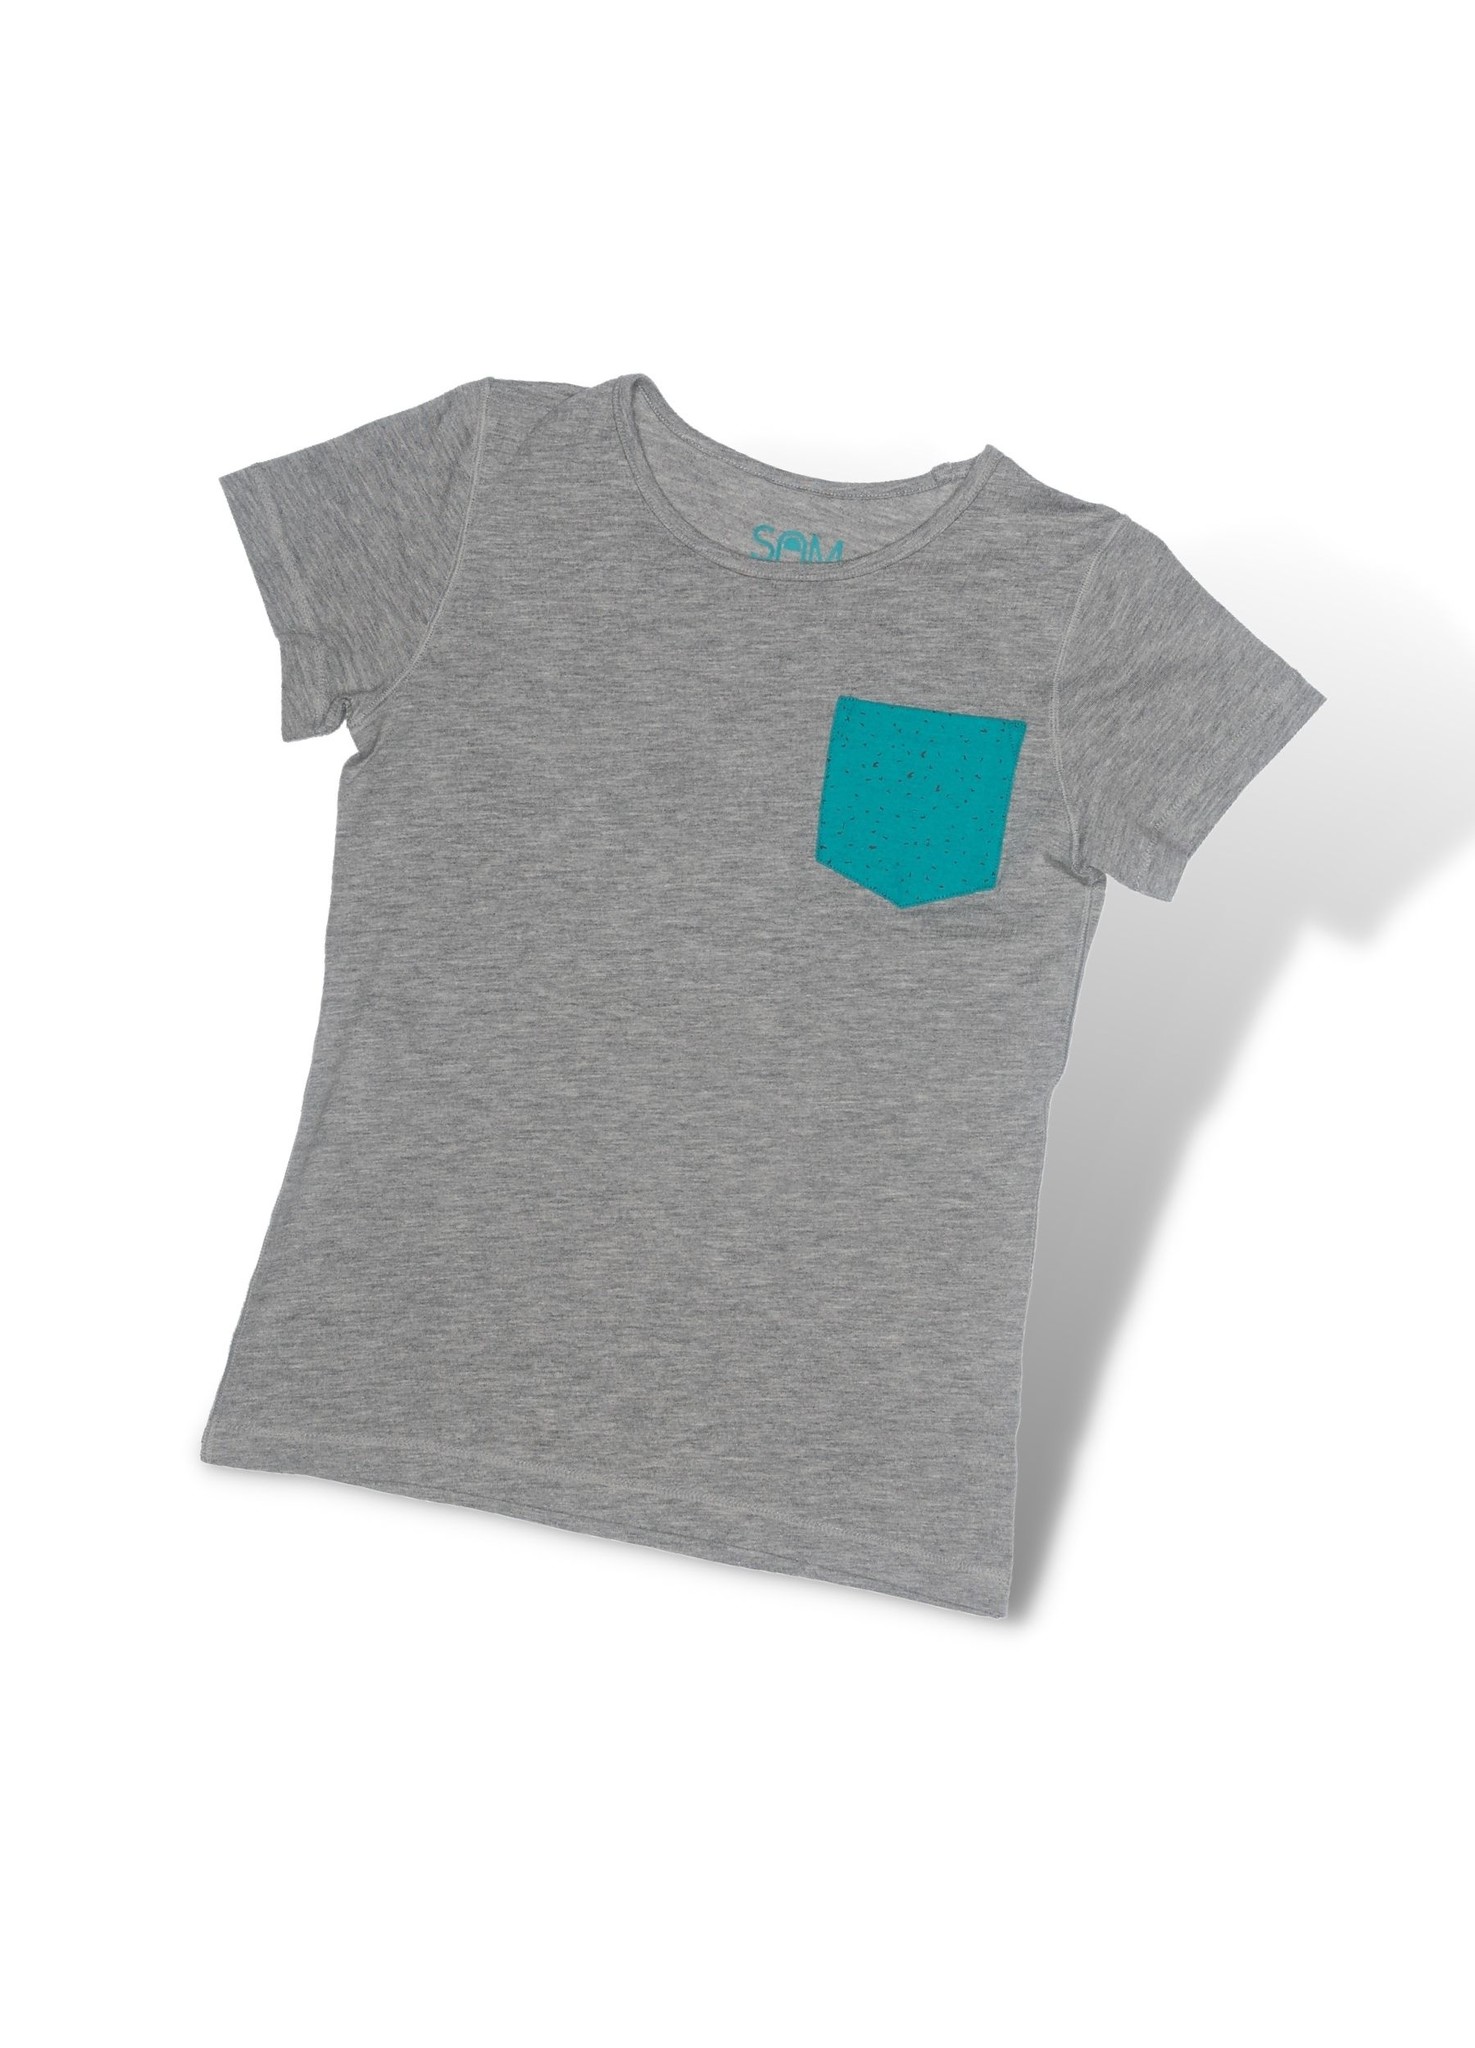 Super soft T-shirt, without tangible seams or labels. Organic cotton. -  SAM, Sensory & More